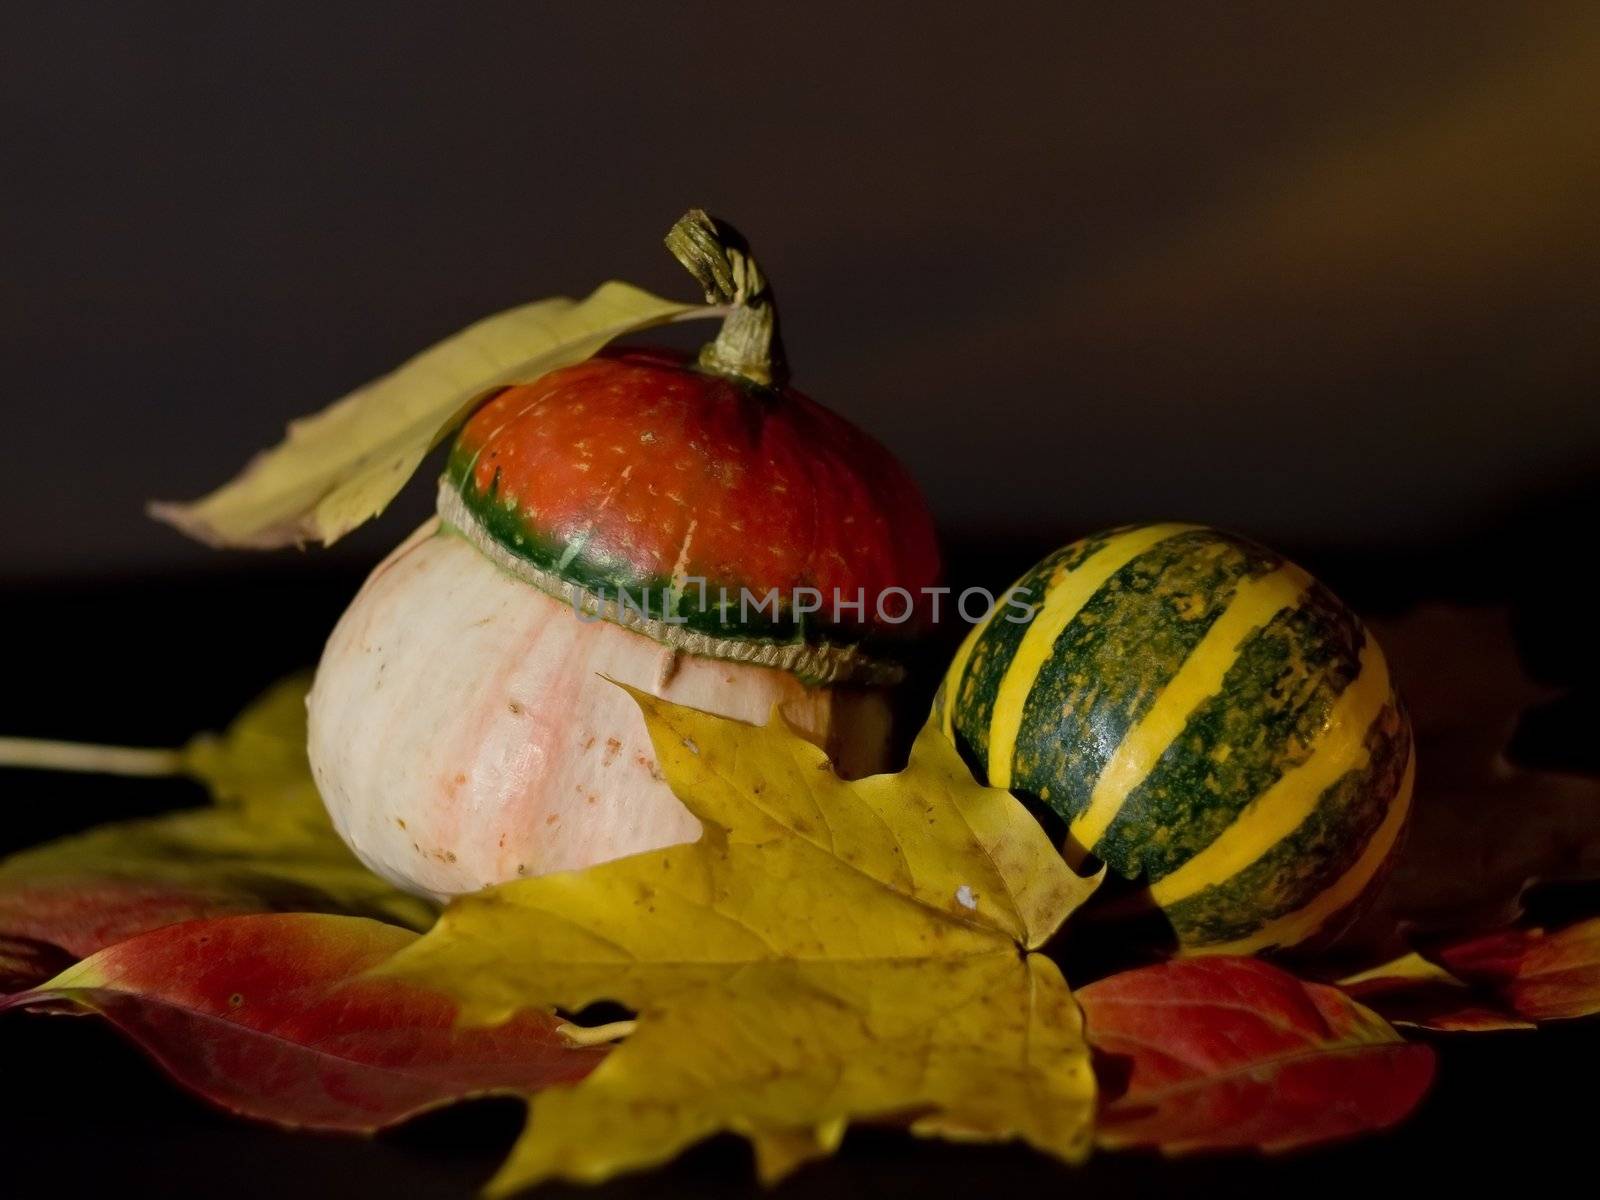 Autumn still life with two small pumpkins and leaves.